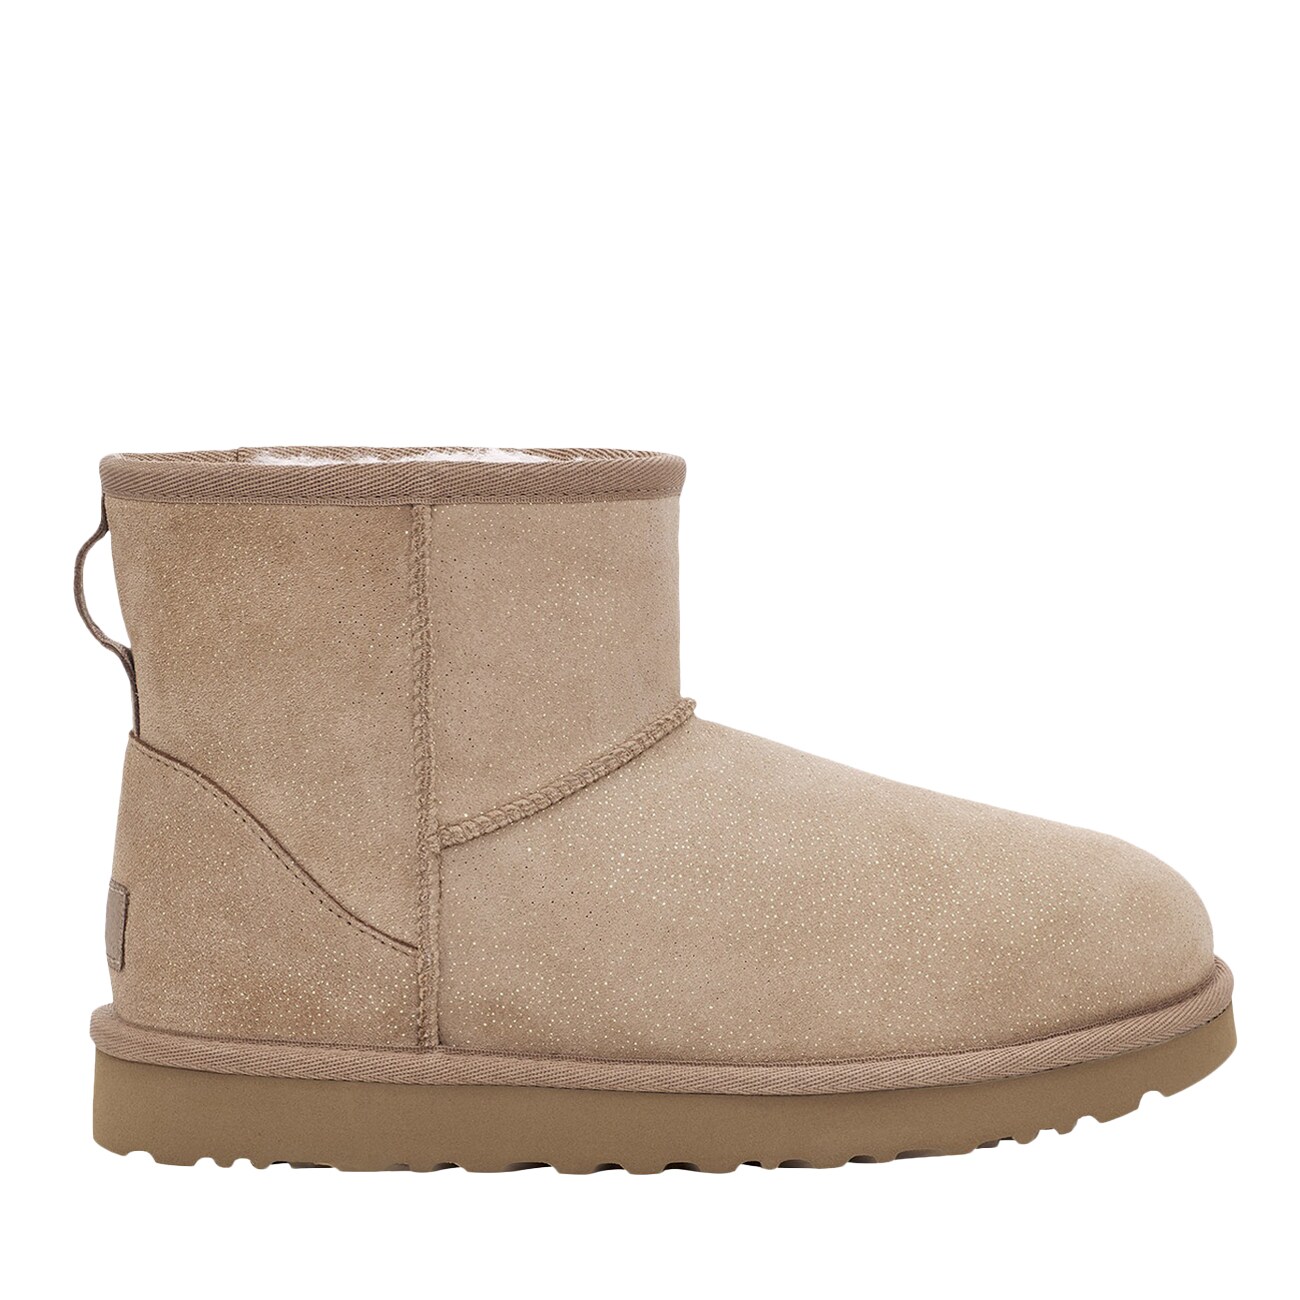 where can i buy uggs for cheap online